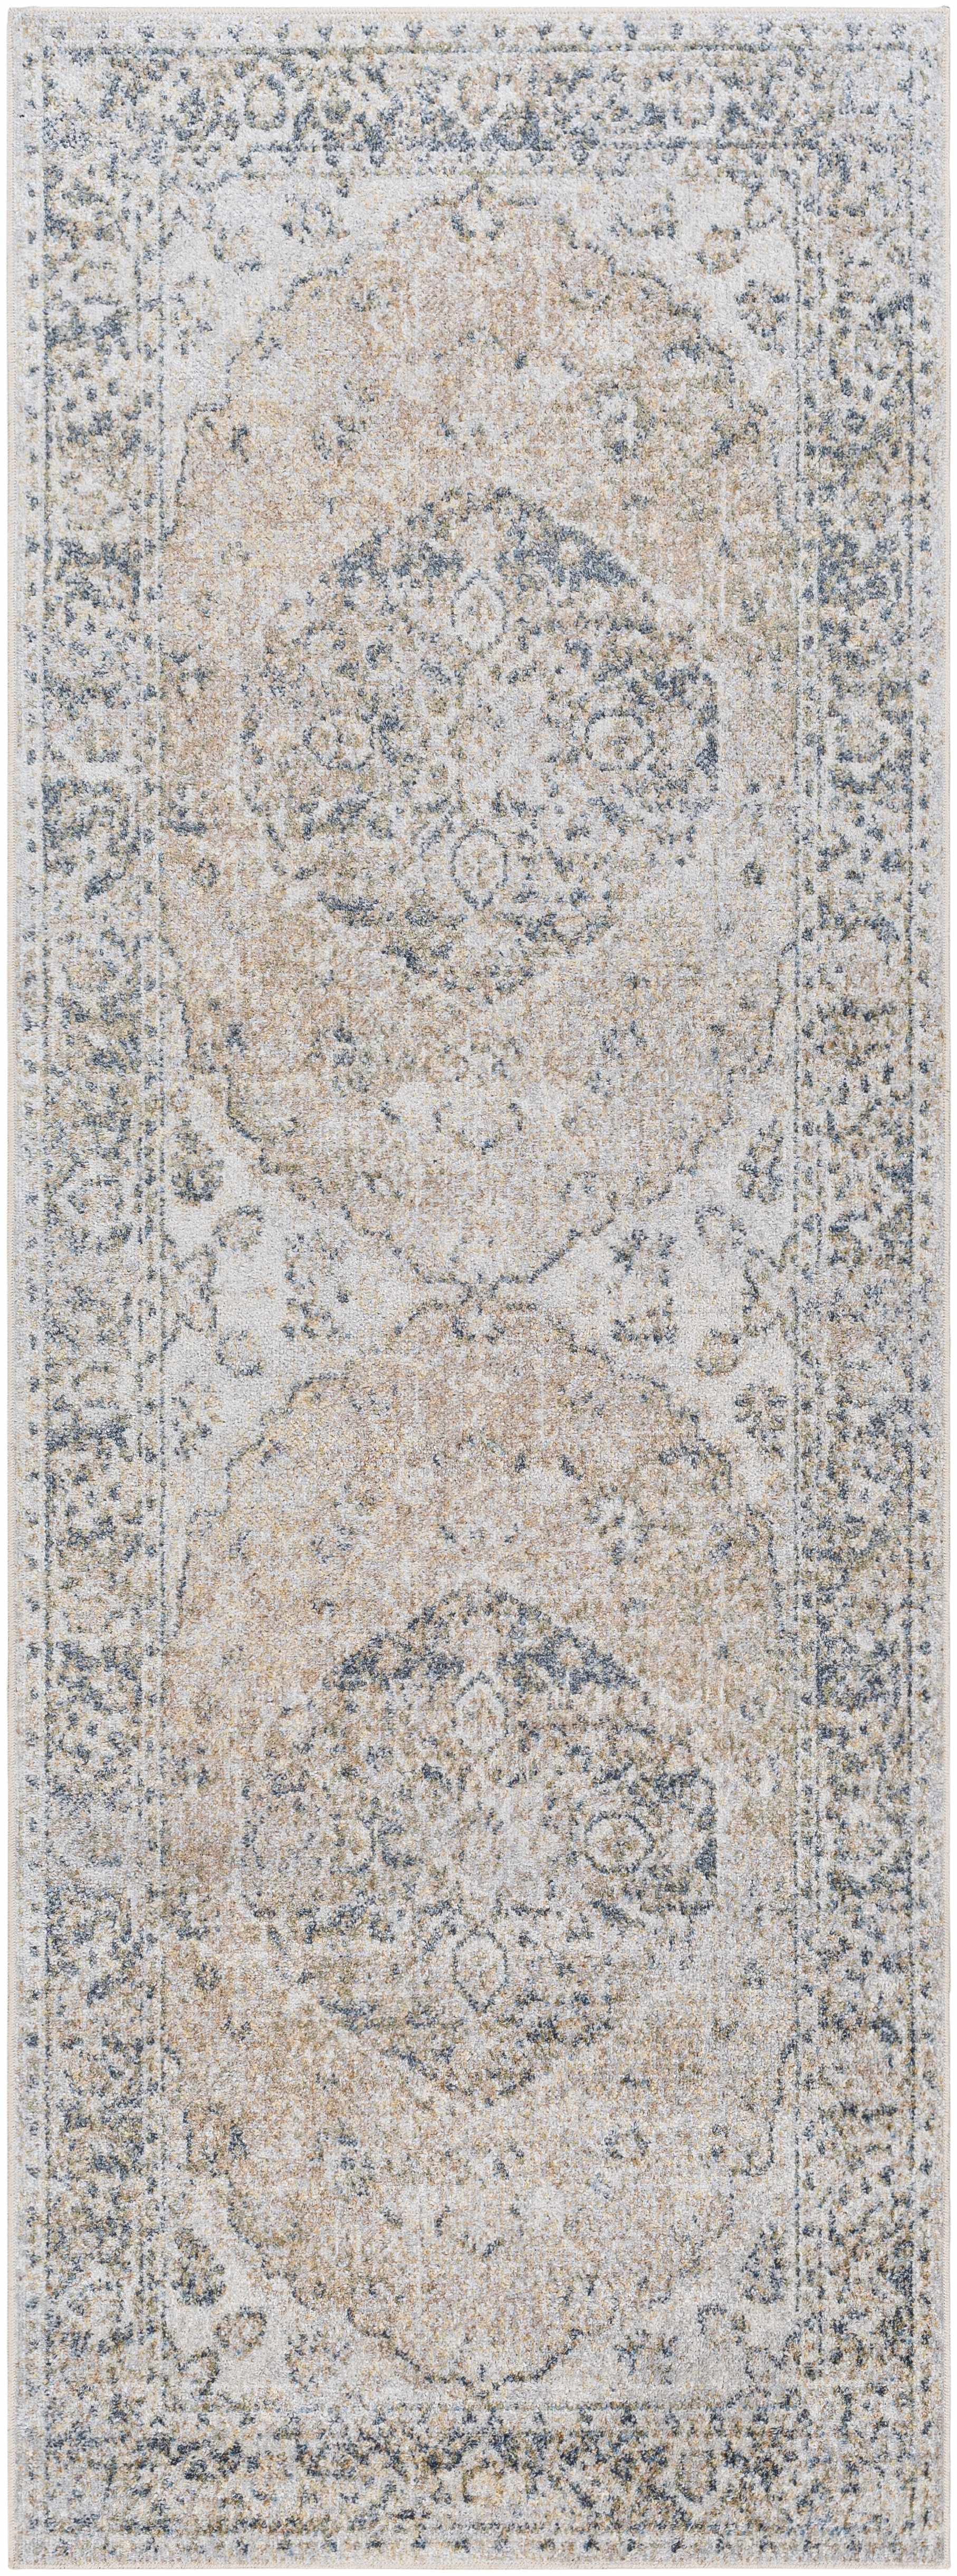 Boutique Rugs Rugs 2'7" x 7'3" Runner Rudo Beige Washable Area Rug